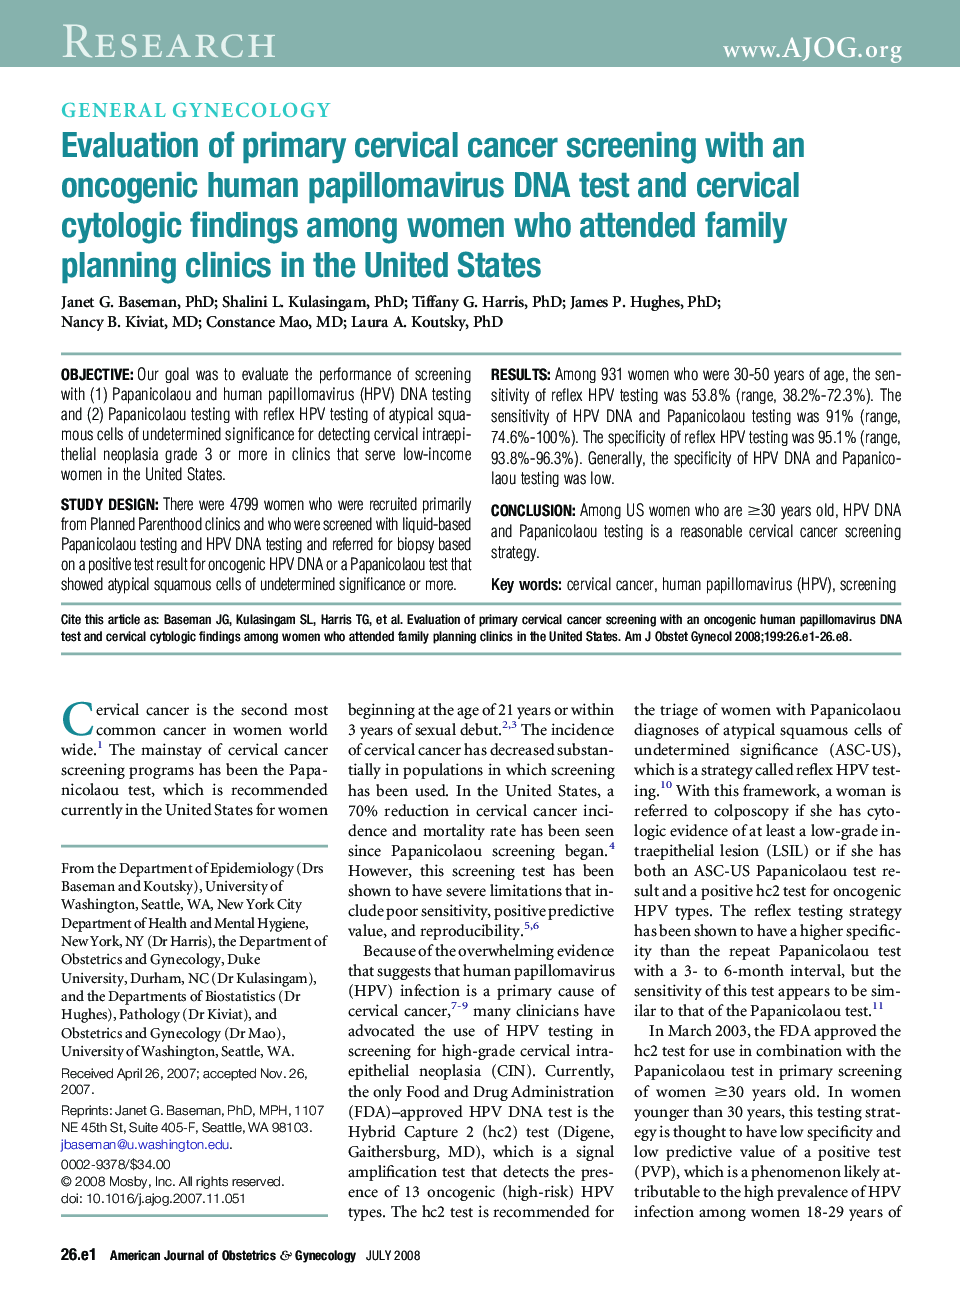 Evaluation of primary cervical cancer screening with an oncogenic human papillomavirus DNA test and cervical cytologic findings among women who attended family planning clinics in the United States